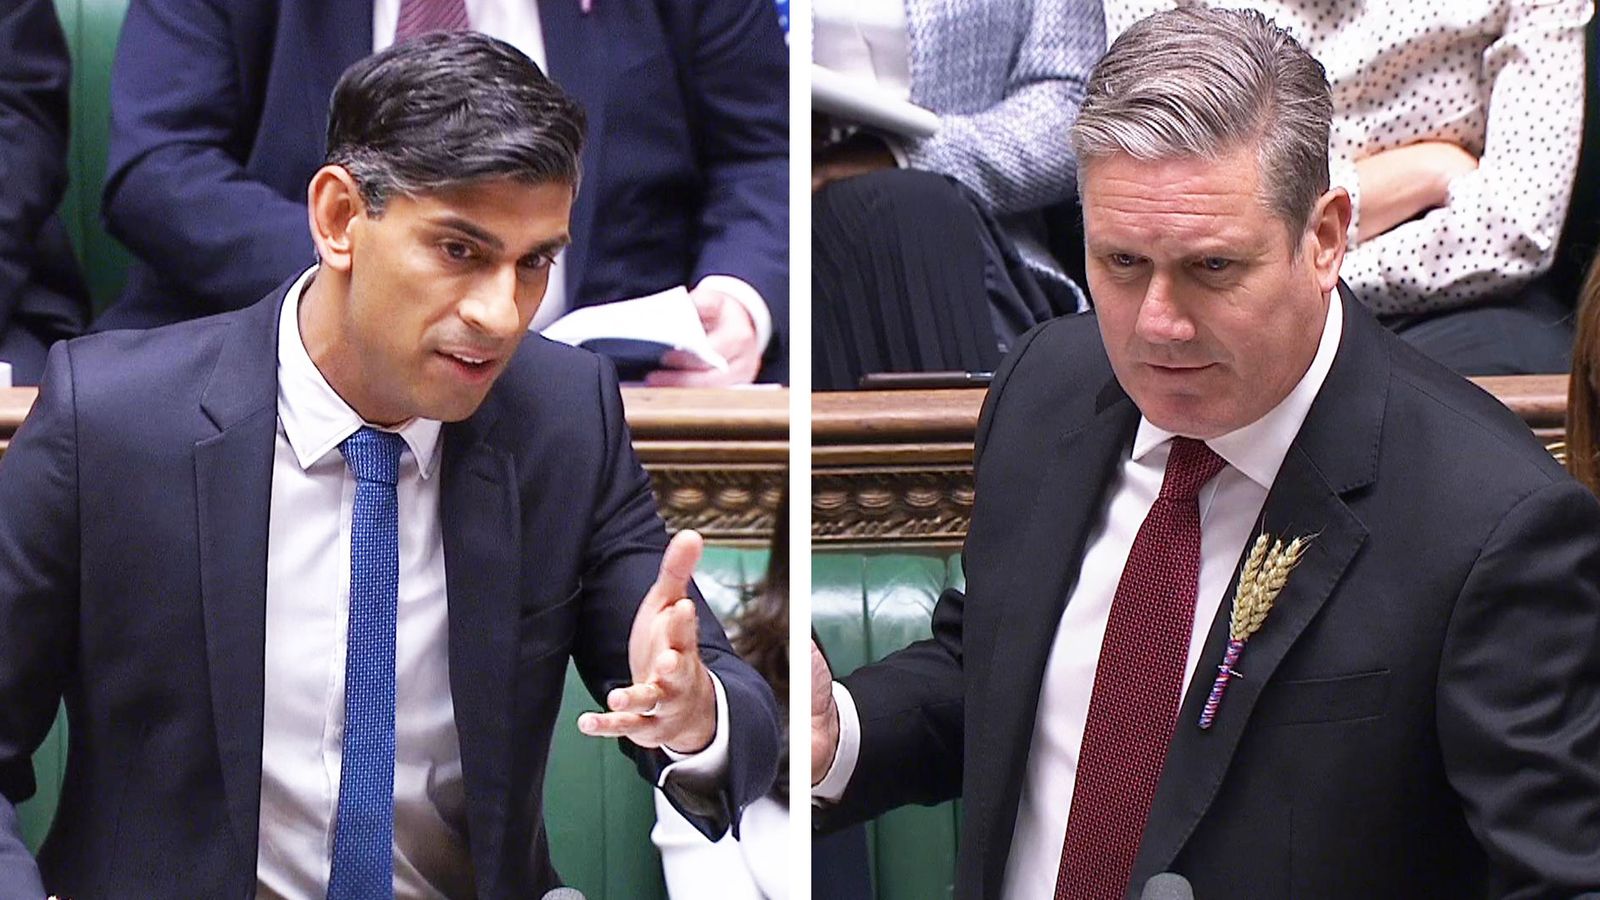 PMQs: Keir Starmer brands Rishi Sunak 'Inaction Man' as he attacks PM on prisons and schools